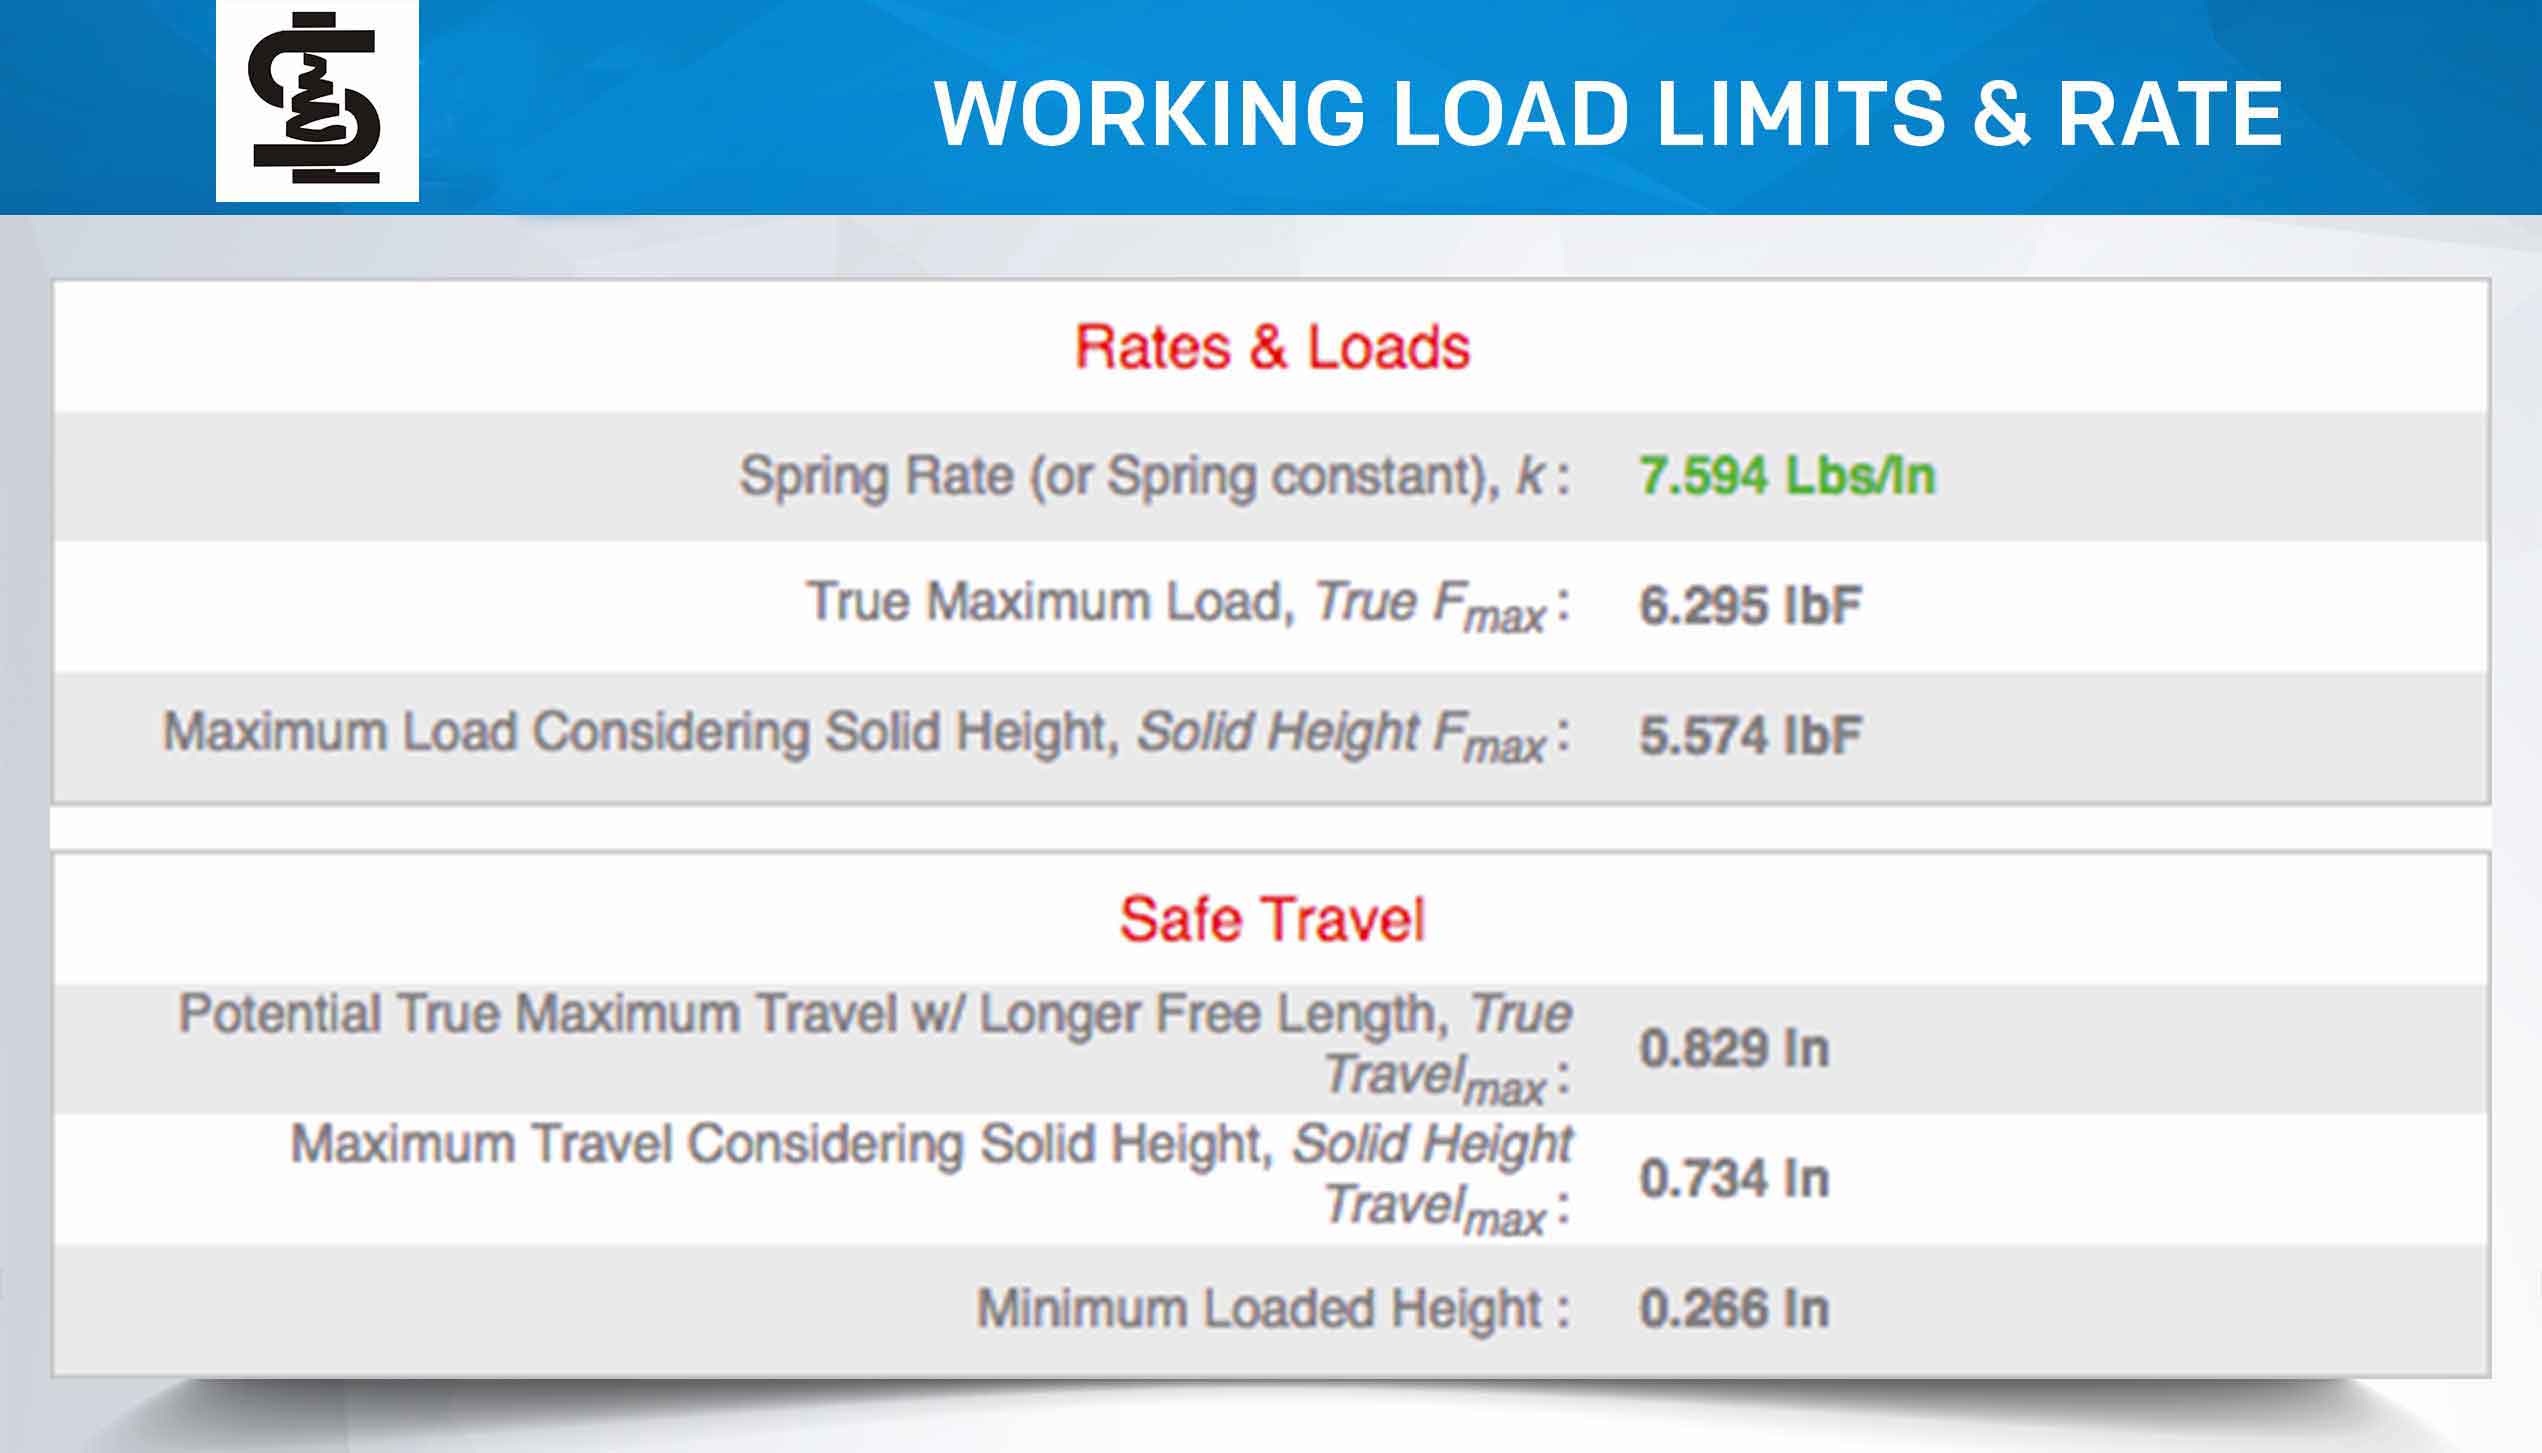 working load limits (maximum load considering solid height and maximum travel considering solid height) shown in Spring Creator calculator